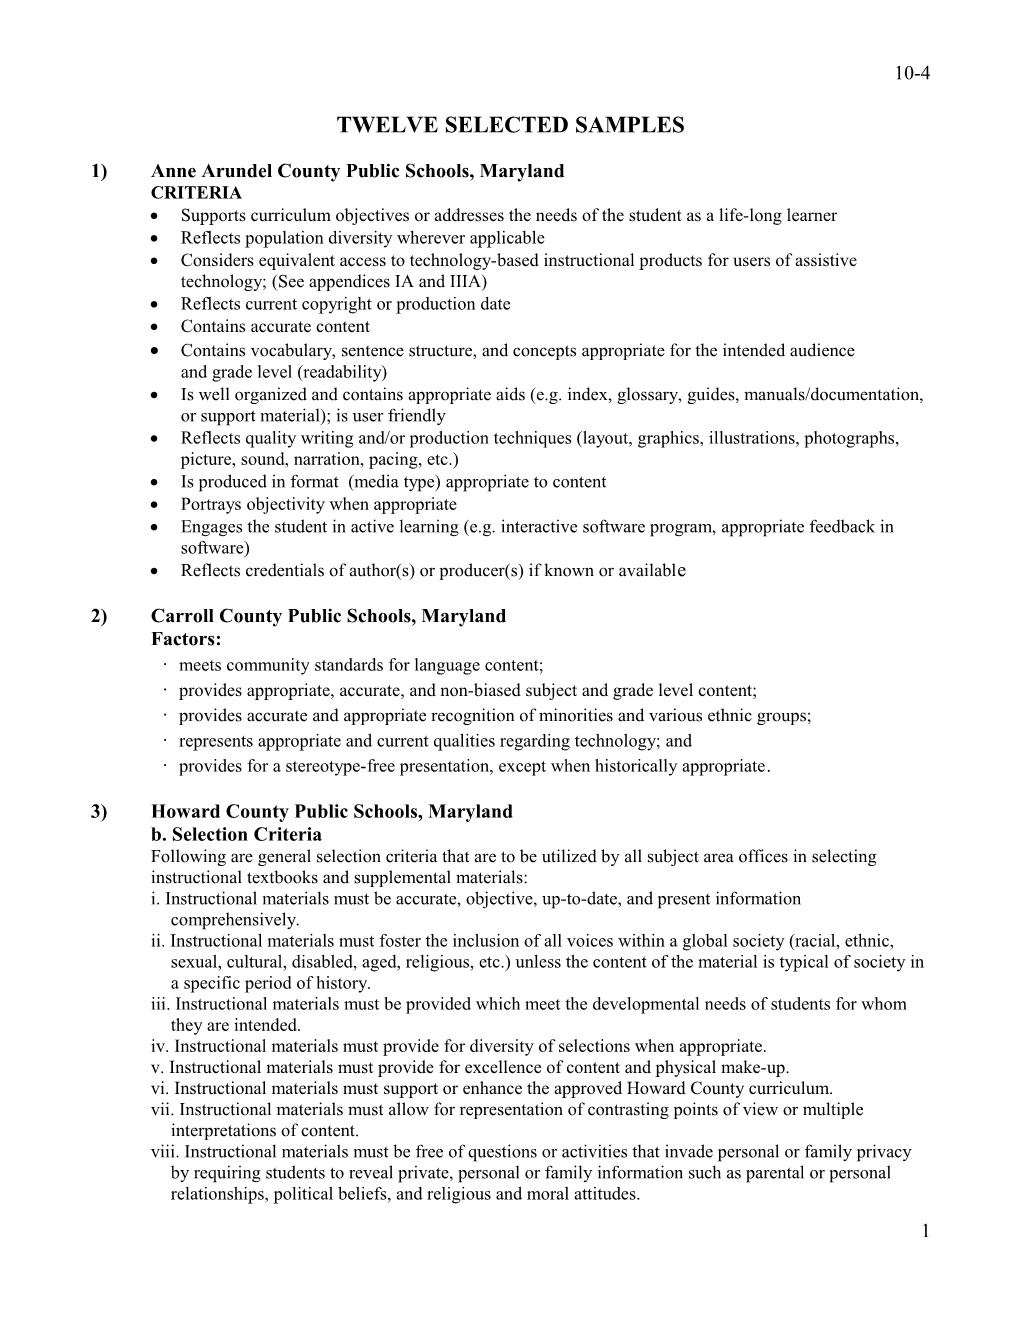 Criteria for Selection of Instructional Materials